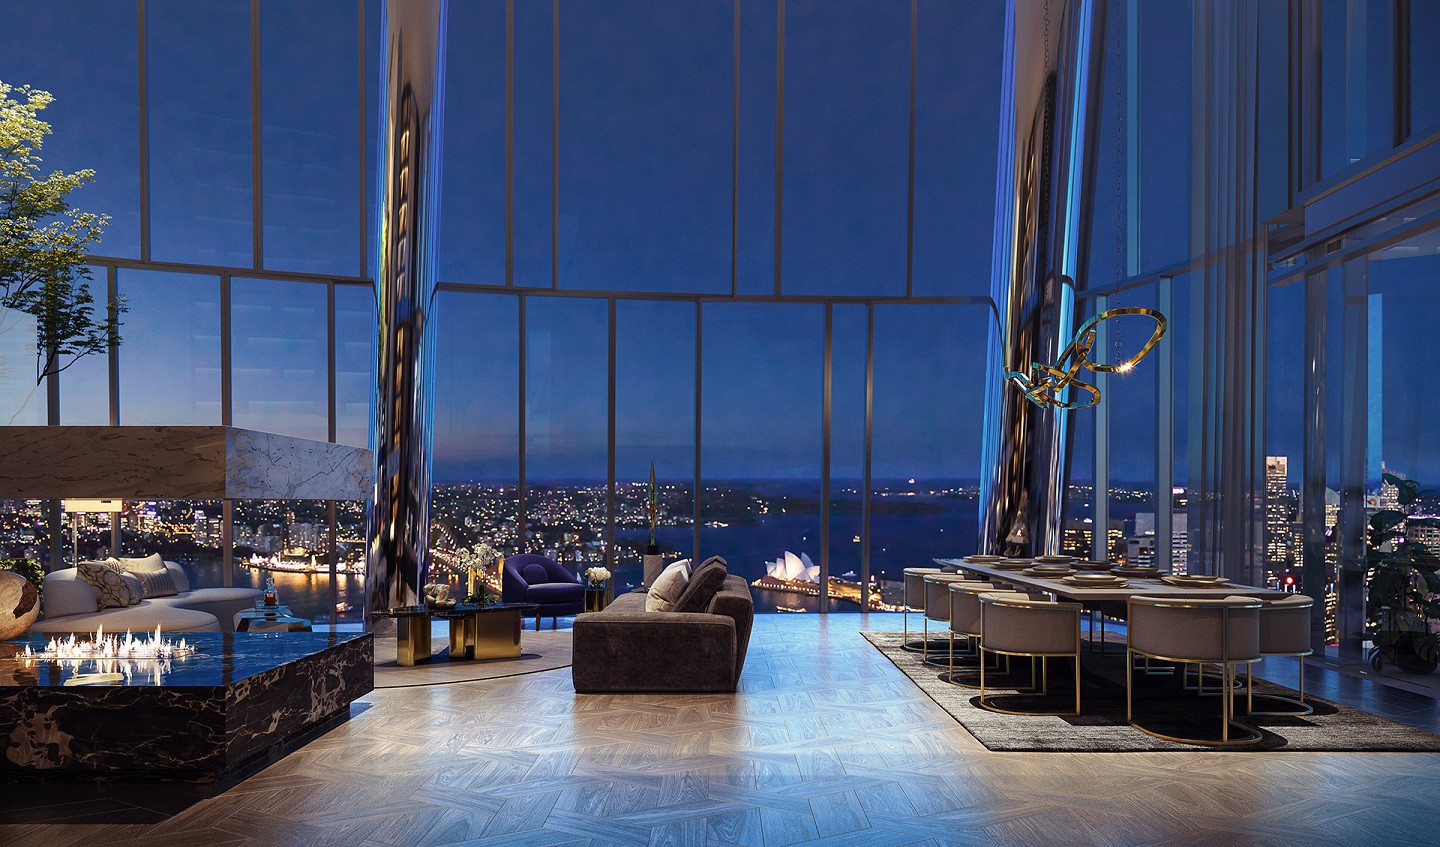 An artist’s rendering of what the penthouse at One Barangaroo will look like.